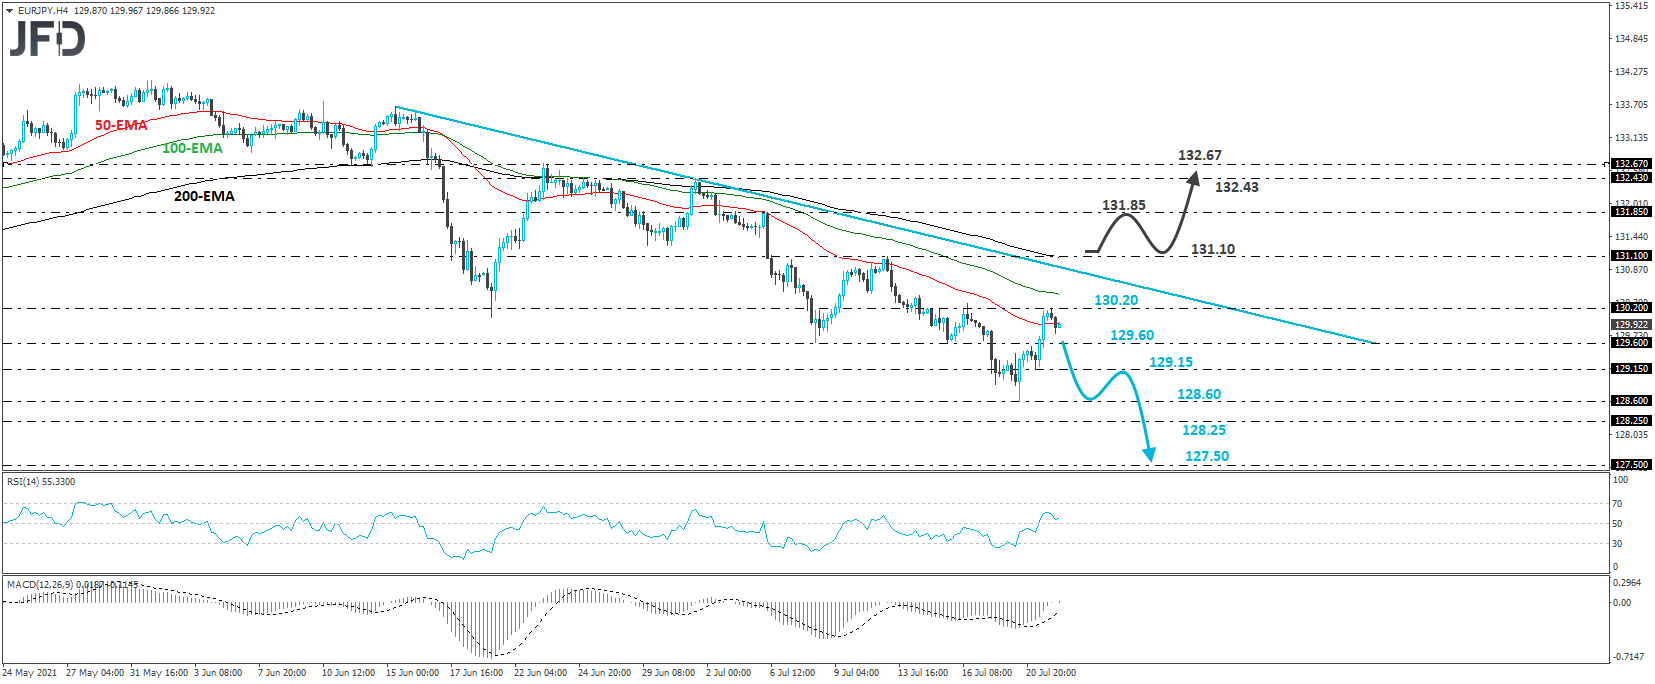 EUR/JPY 4-hour chart technical analysis